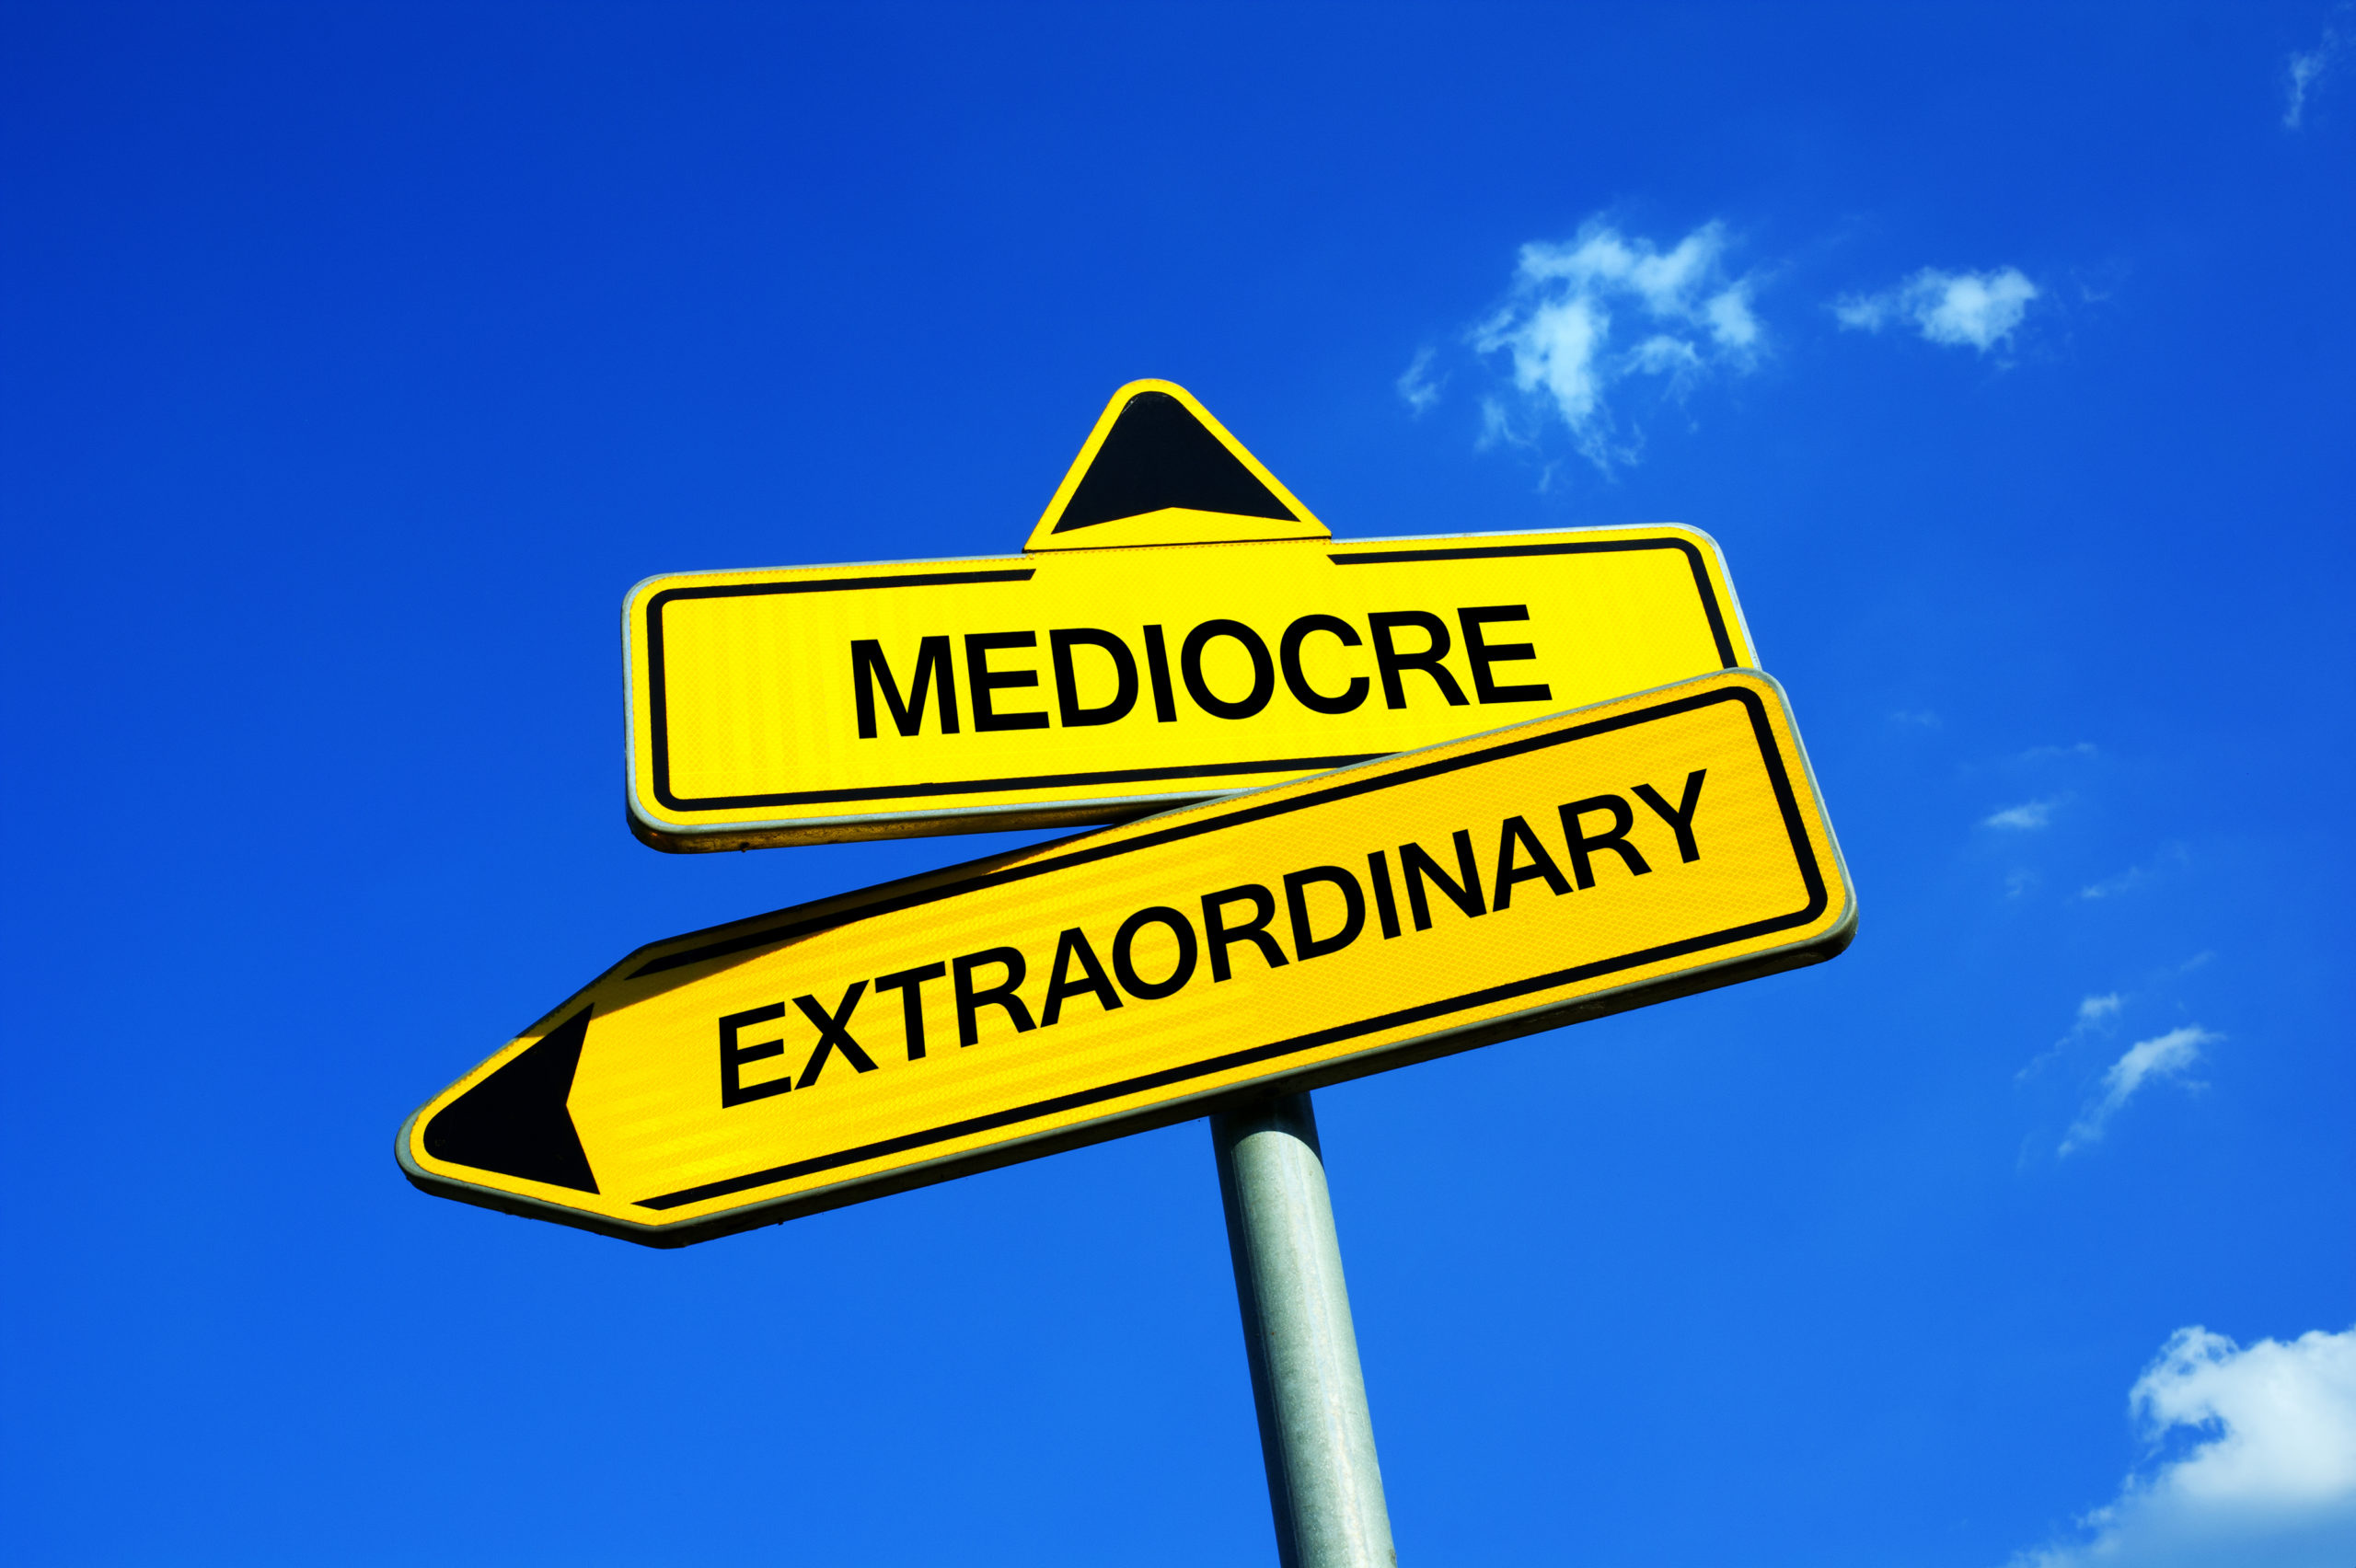 Crossroads of Mediocre and Extraordinary